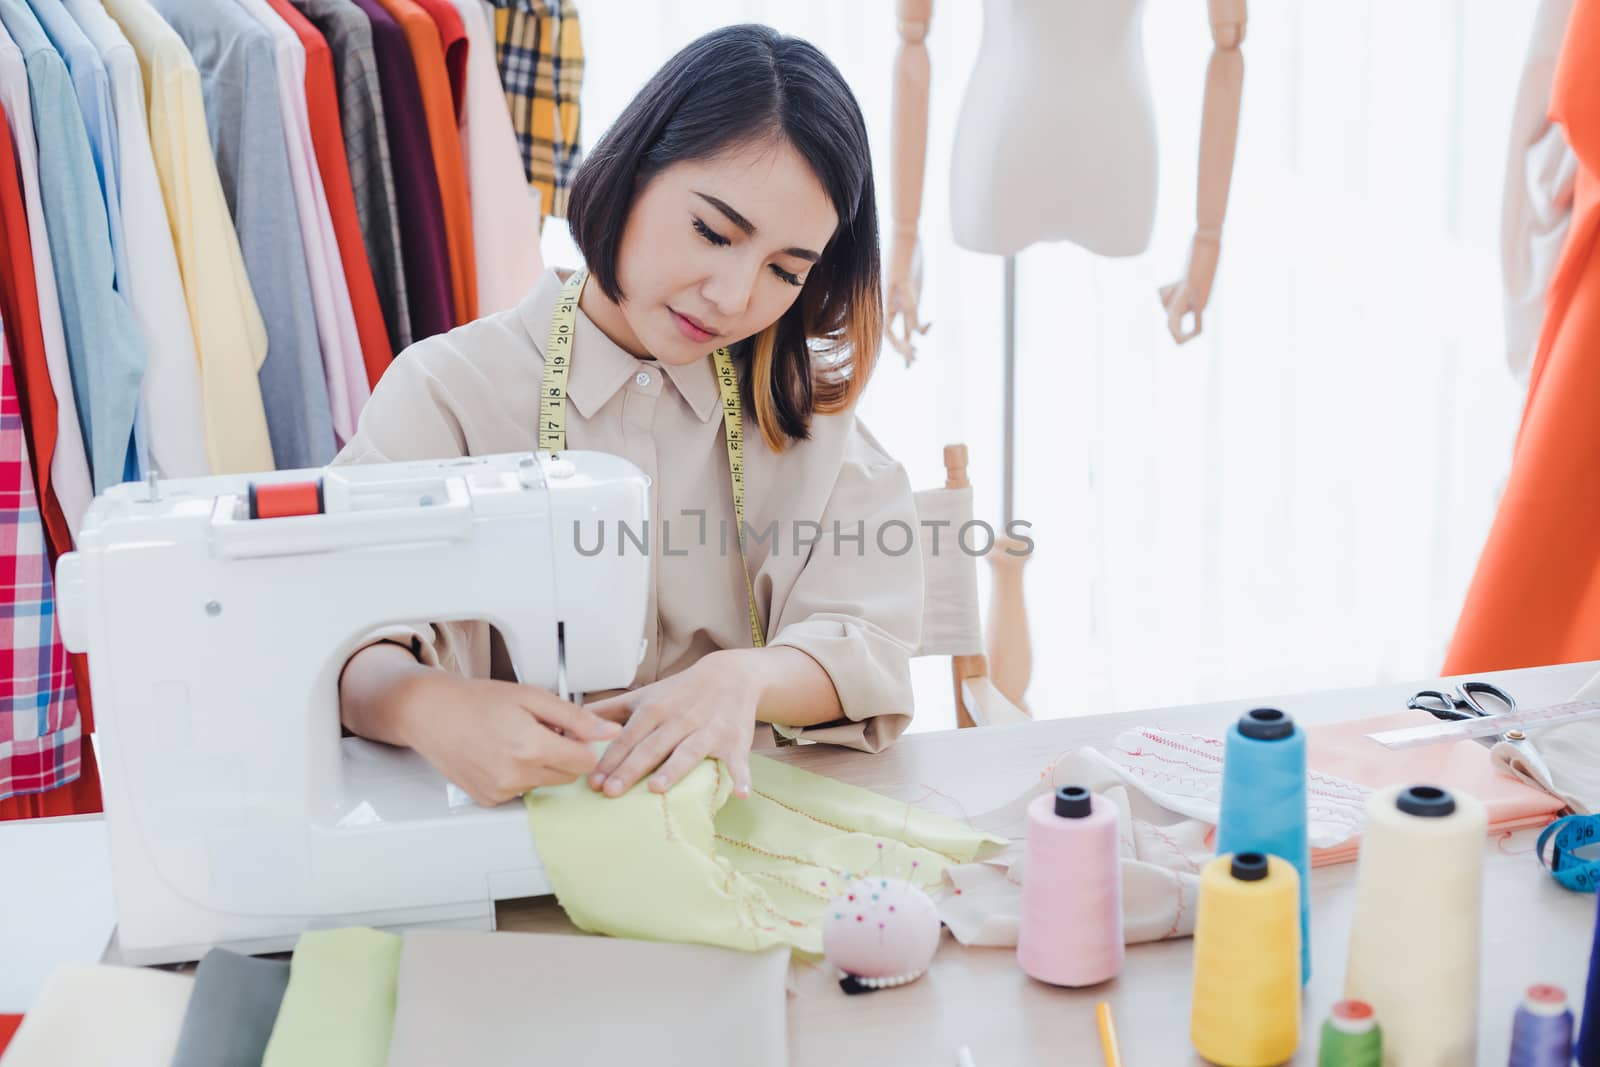 Professional fashion designers are cutting new clothes using sewing machines in studio. Designer using sewing machine in working. Startup designer concept.